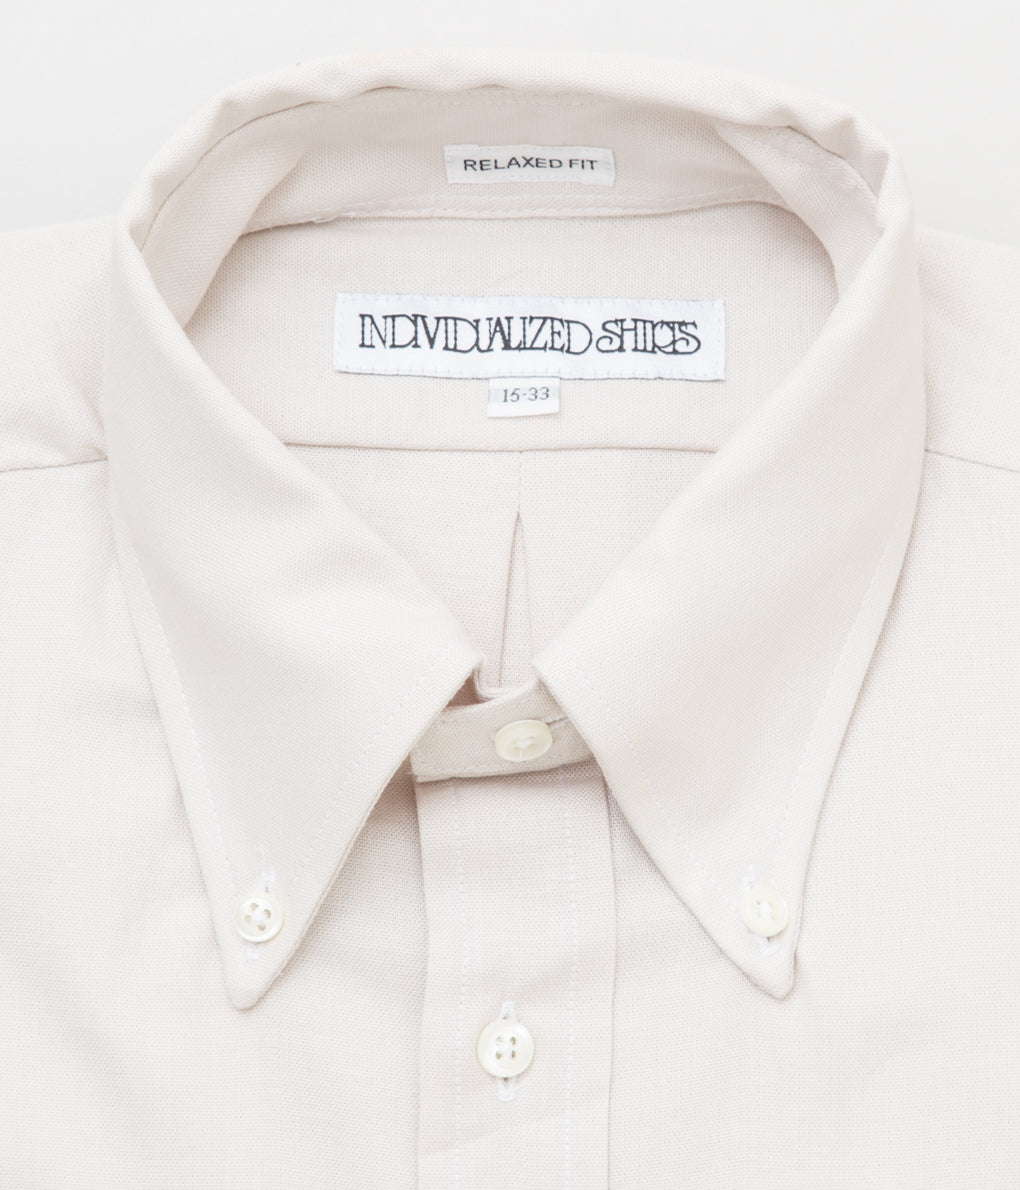 INDIVIDUALIZED SHIRTS "HERITAGE CHAMBRAY(RELAXED FIT BUTTON DOWN SHIRT)"(BEIGE)